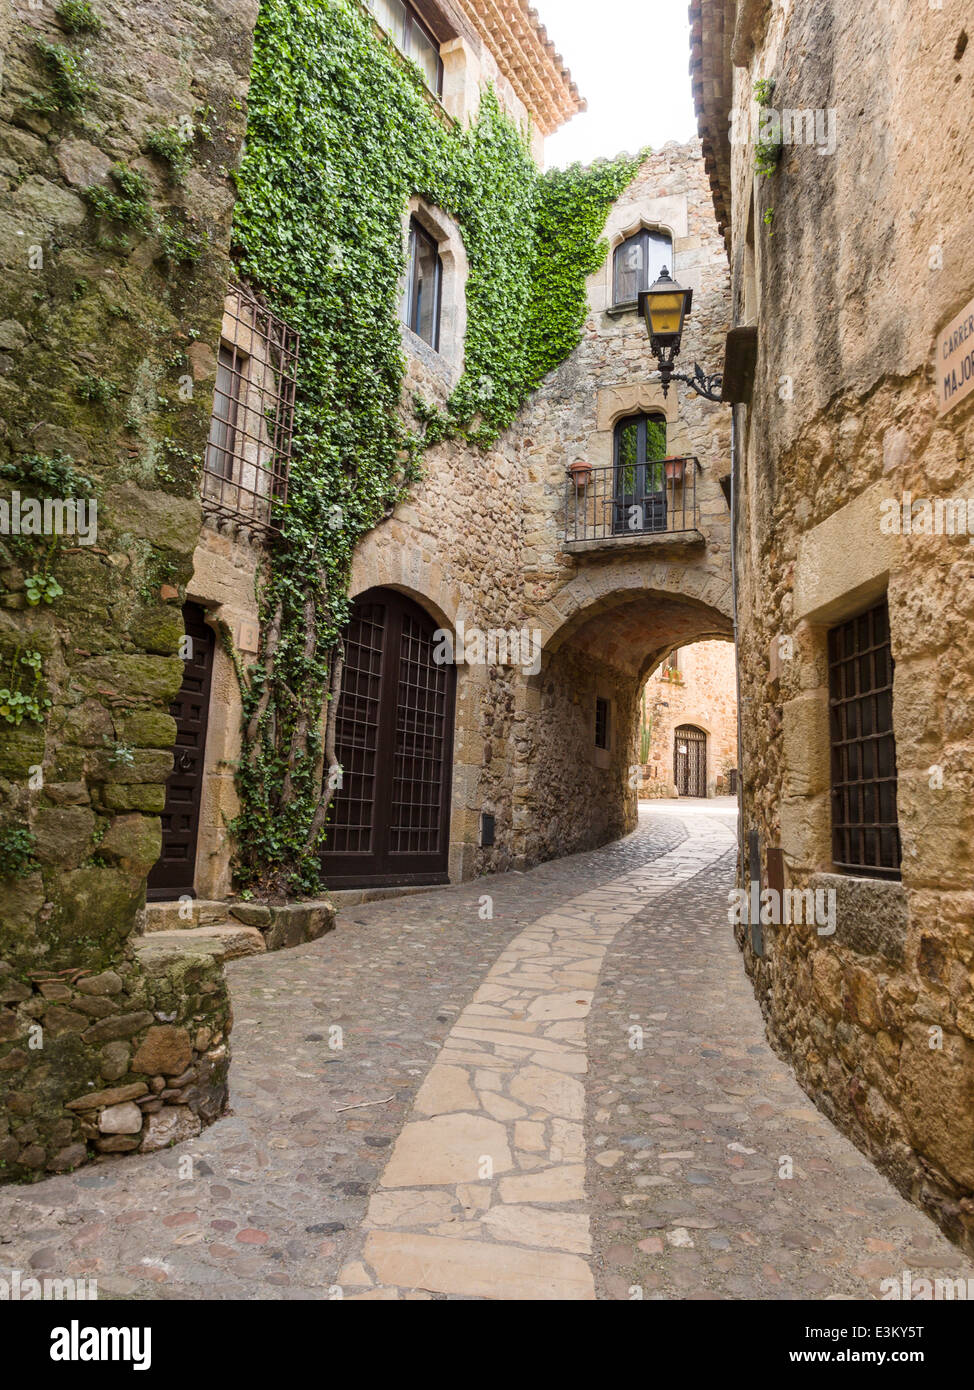 Winding Back street in Pals. A curved path/street in Pals leads to a private courtyard. Ivy grows decoratively up the walls Stock Photo